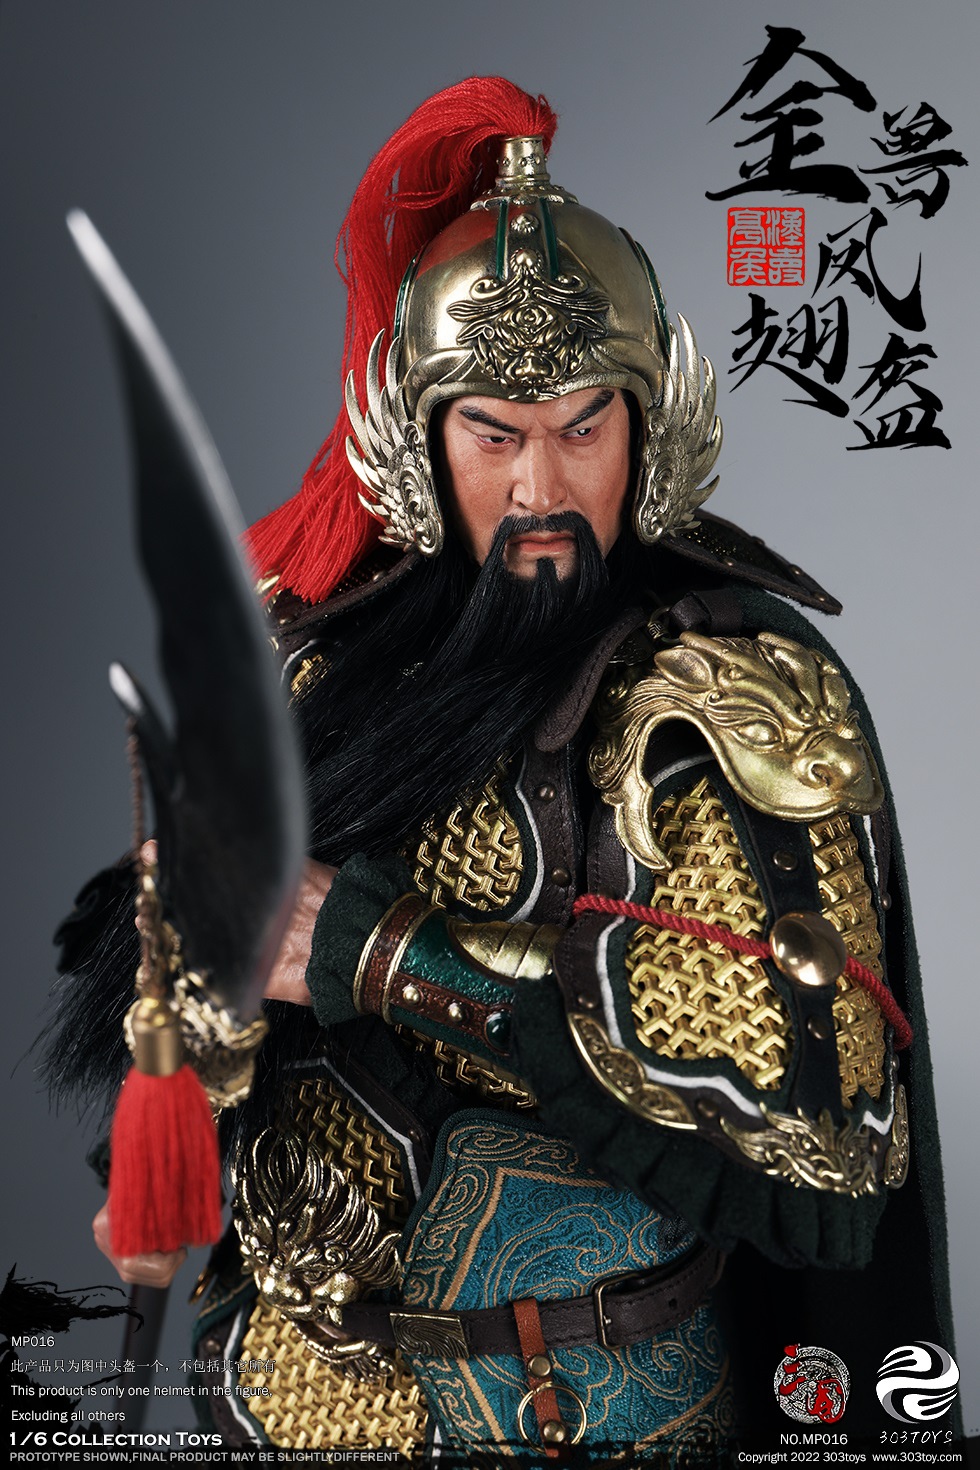 chinese - NEW PRODUCT: 303TOYS: 1/6 Three Kingdoms Series - Zhang Feiyi de [pure copper edition] dark cloud snow war horse, phoenix wing helmet #MP013/MP014 15193311